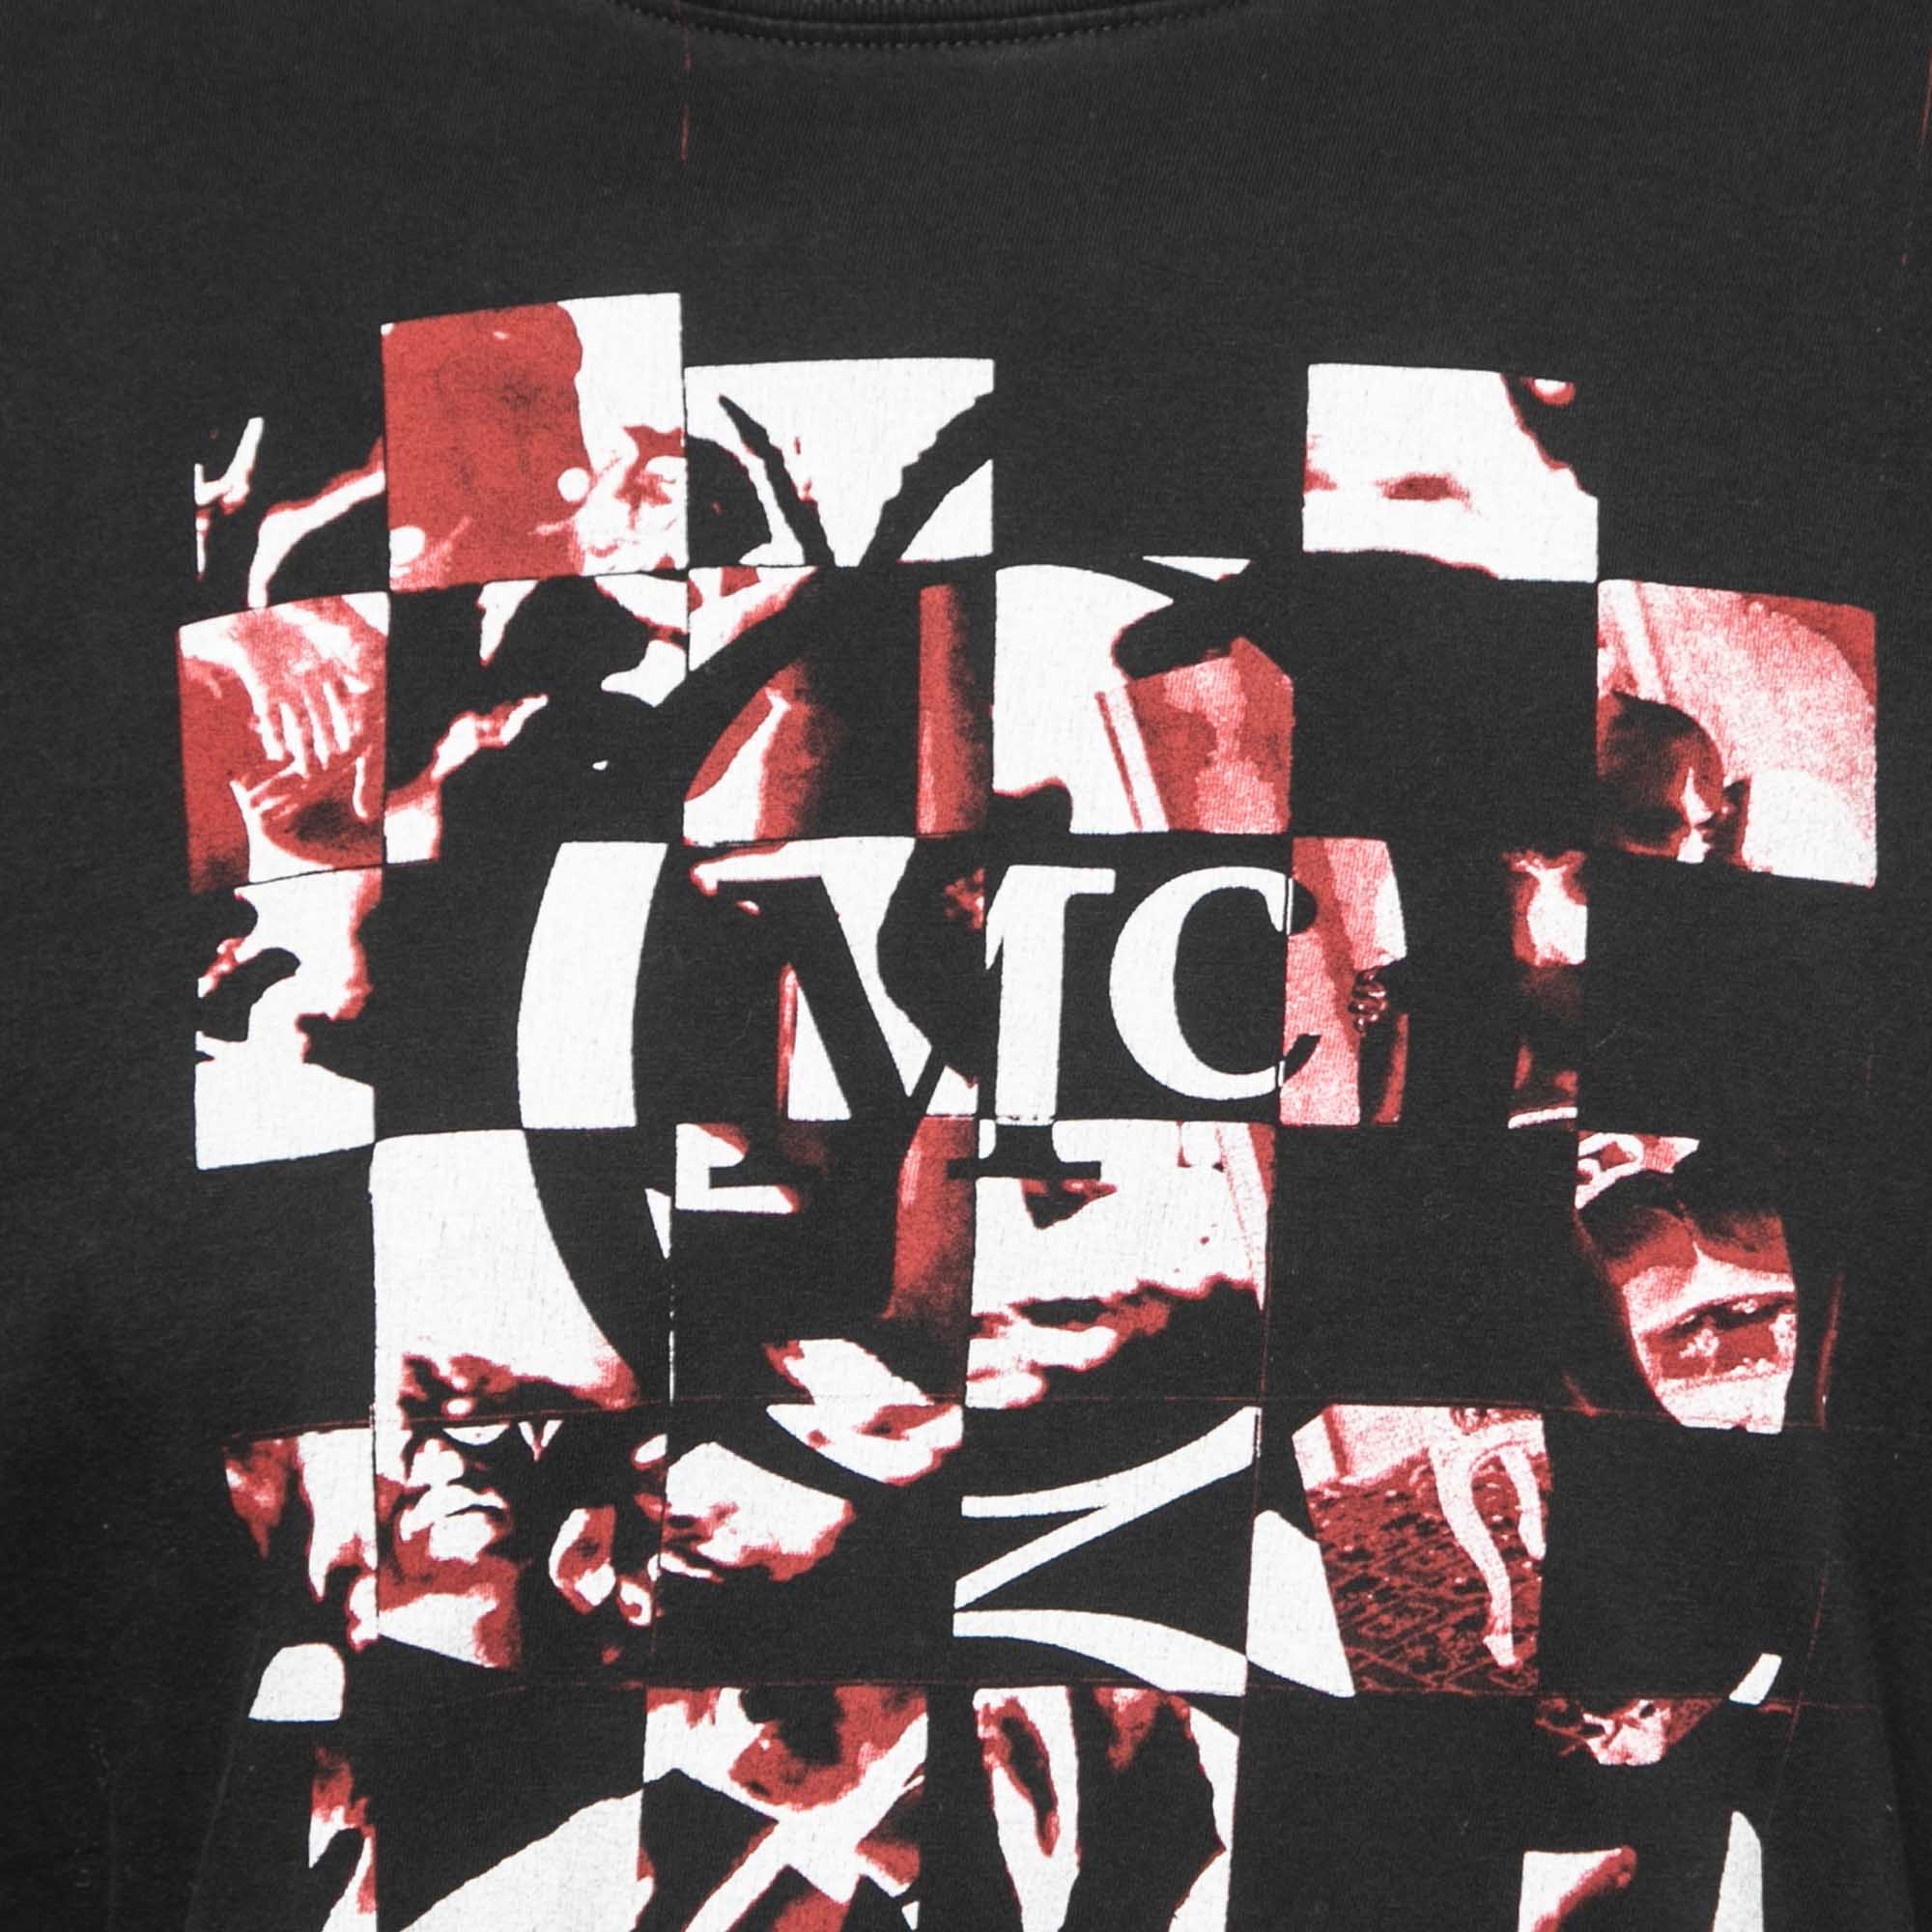 McQ By Alexander McQueen Black Printed Cotton Knit Crew Neck T-Shirt S